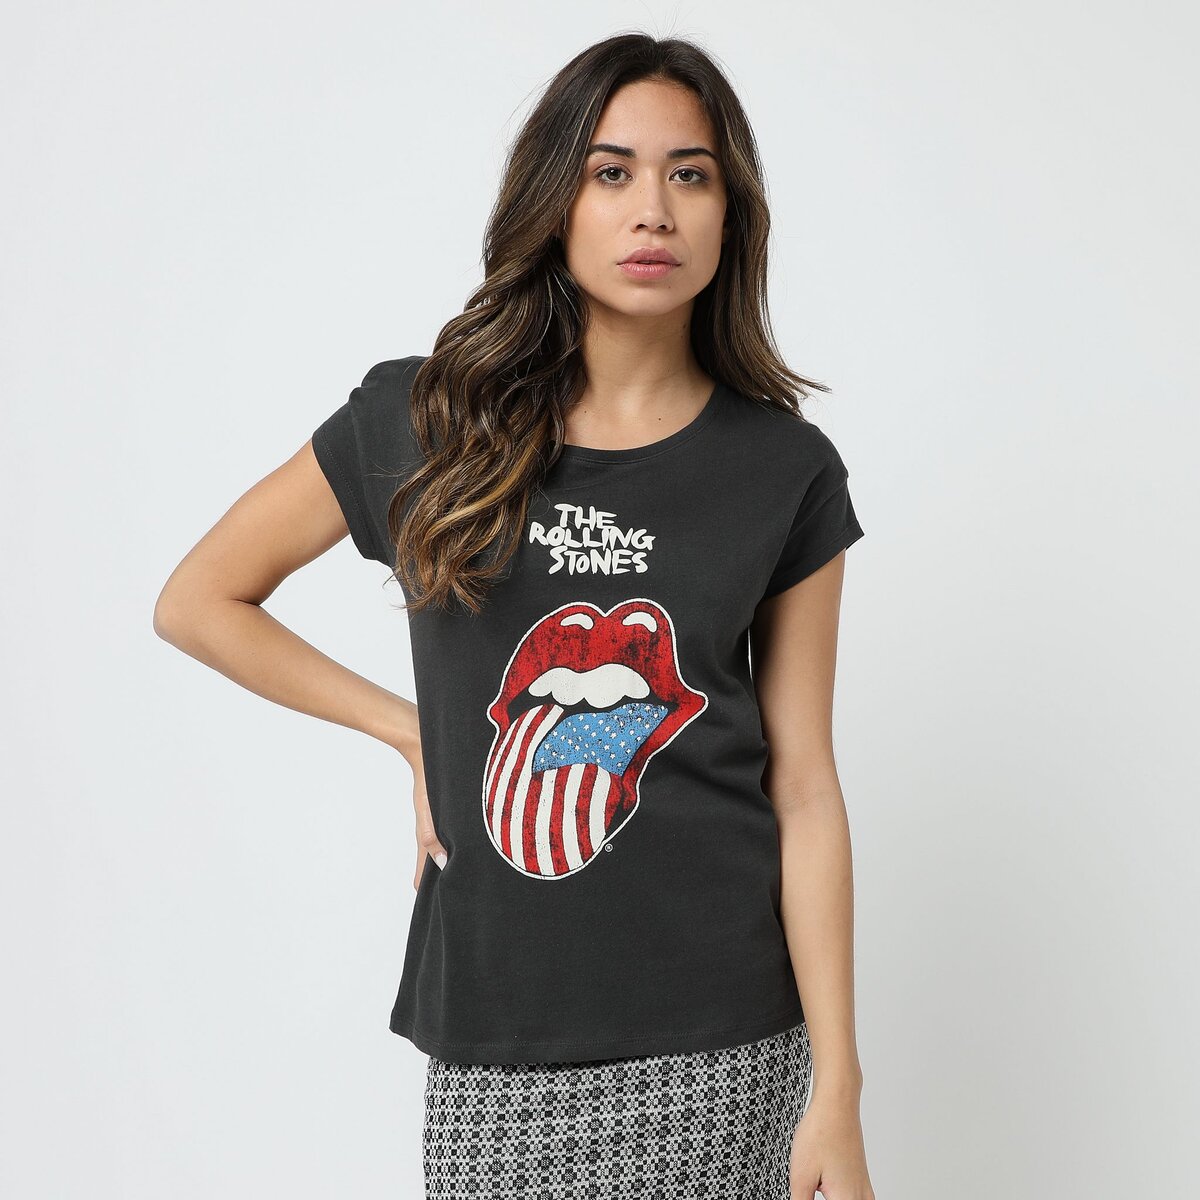 INEXTENSO T-shirt manches courtes gris femme Rolling Stones